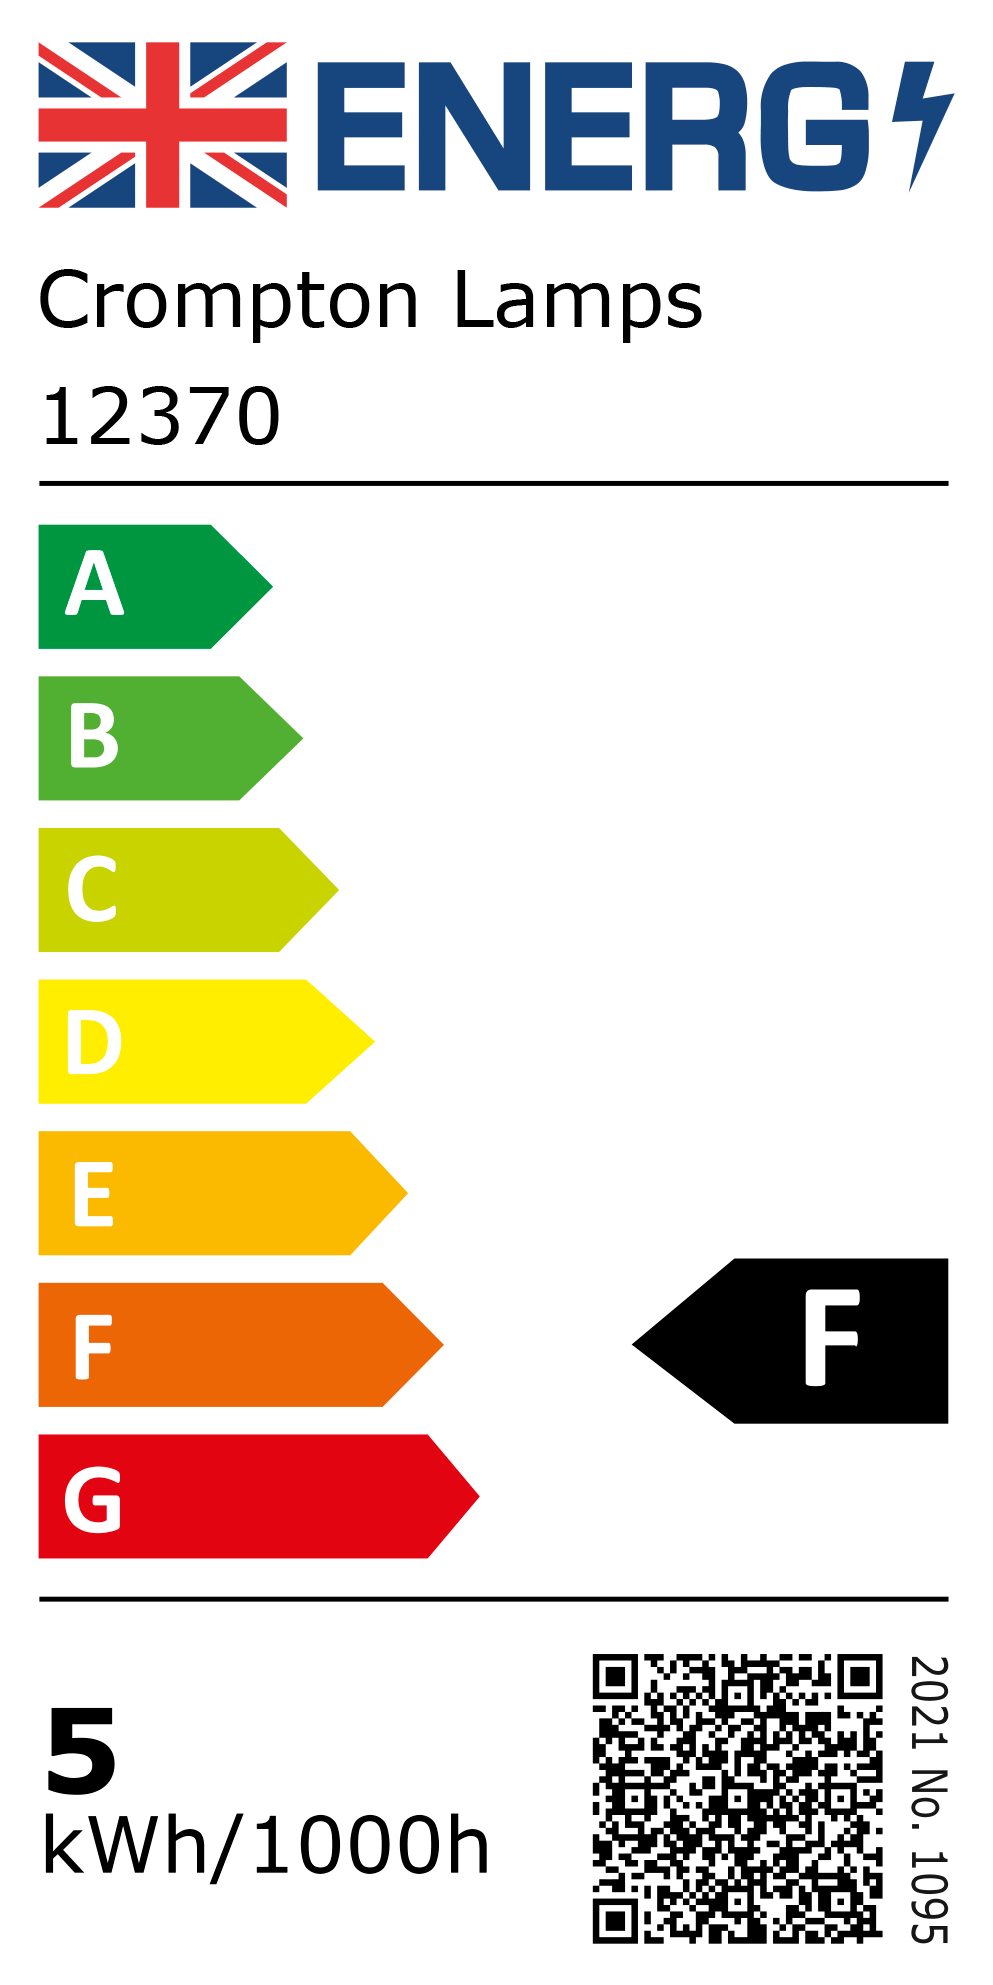 New 2021 Energy Rating Label: Stock Code 12370